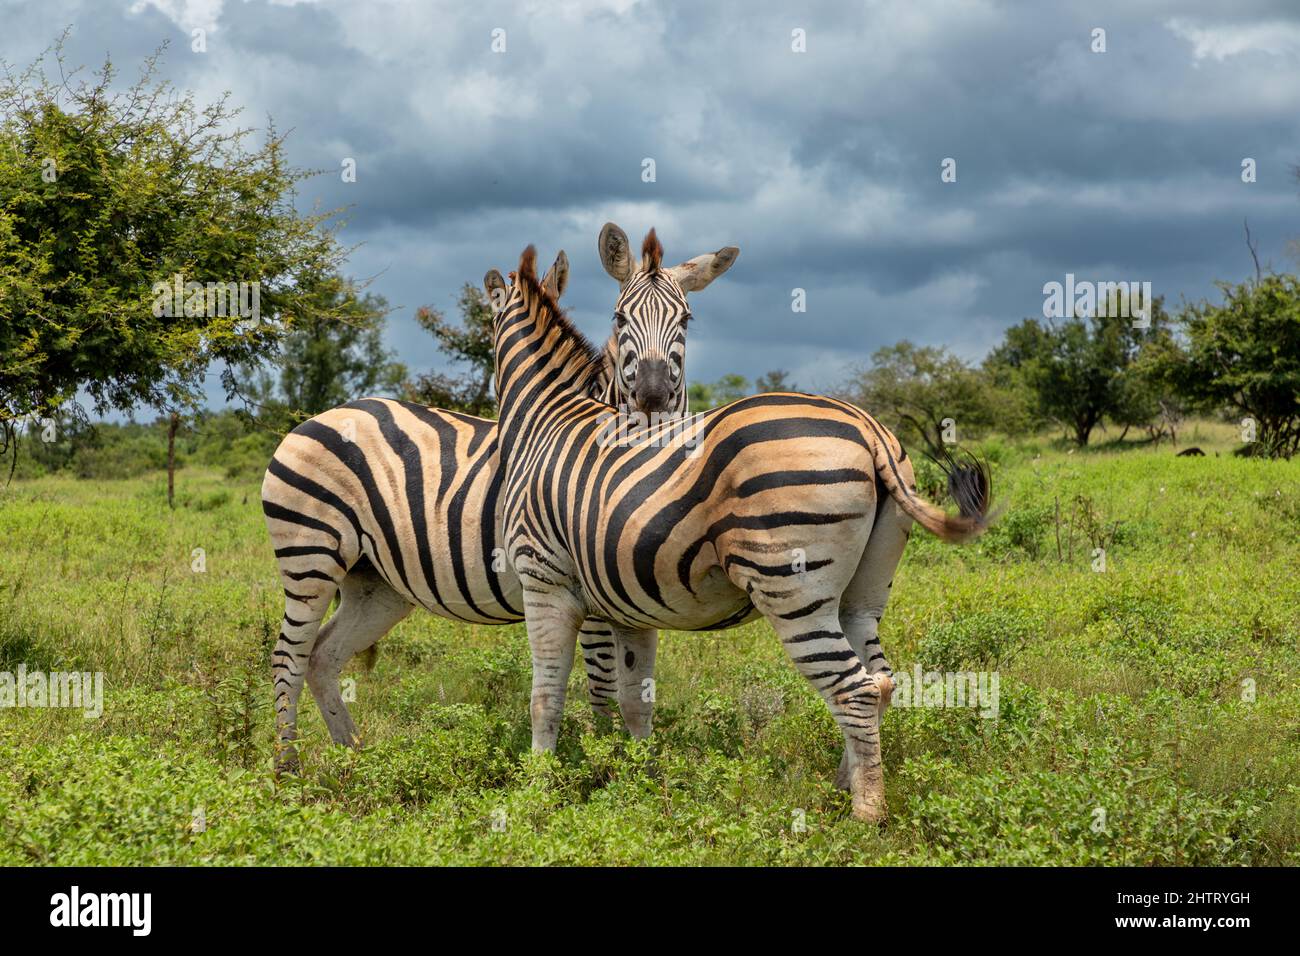 Two zebras embracing each other in the African bush Stock Photo